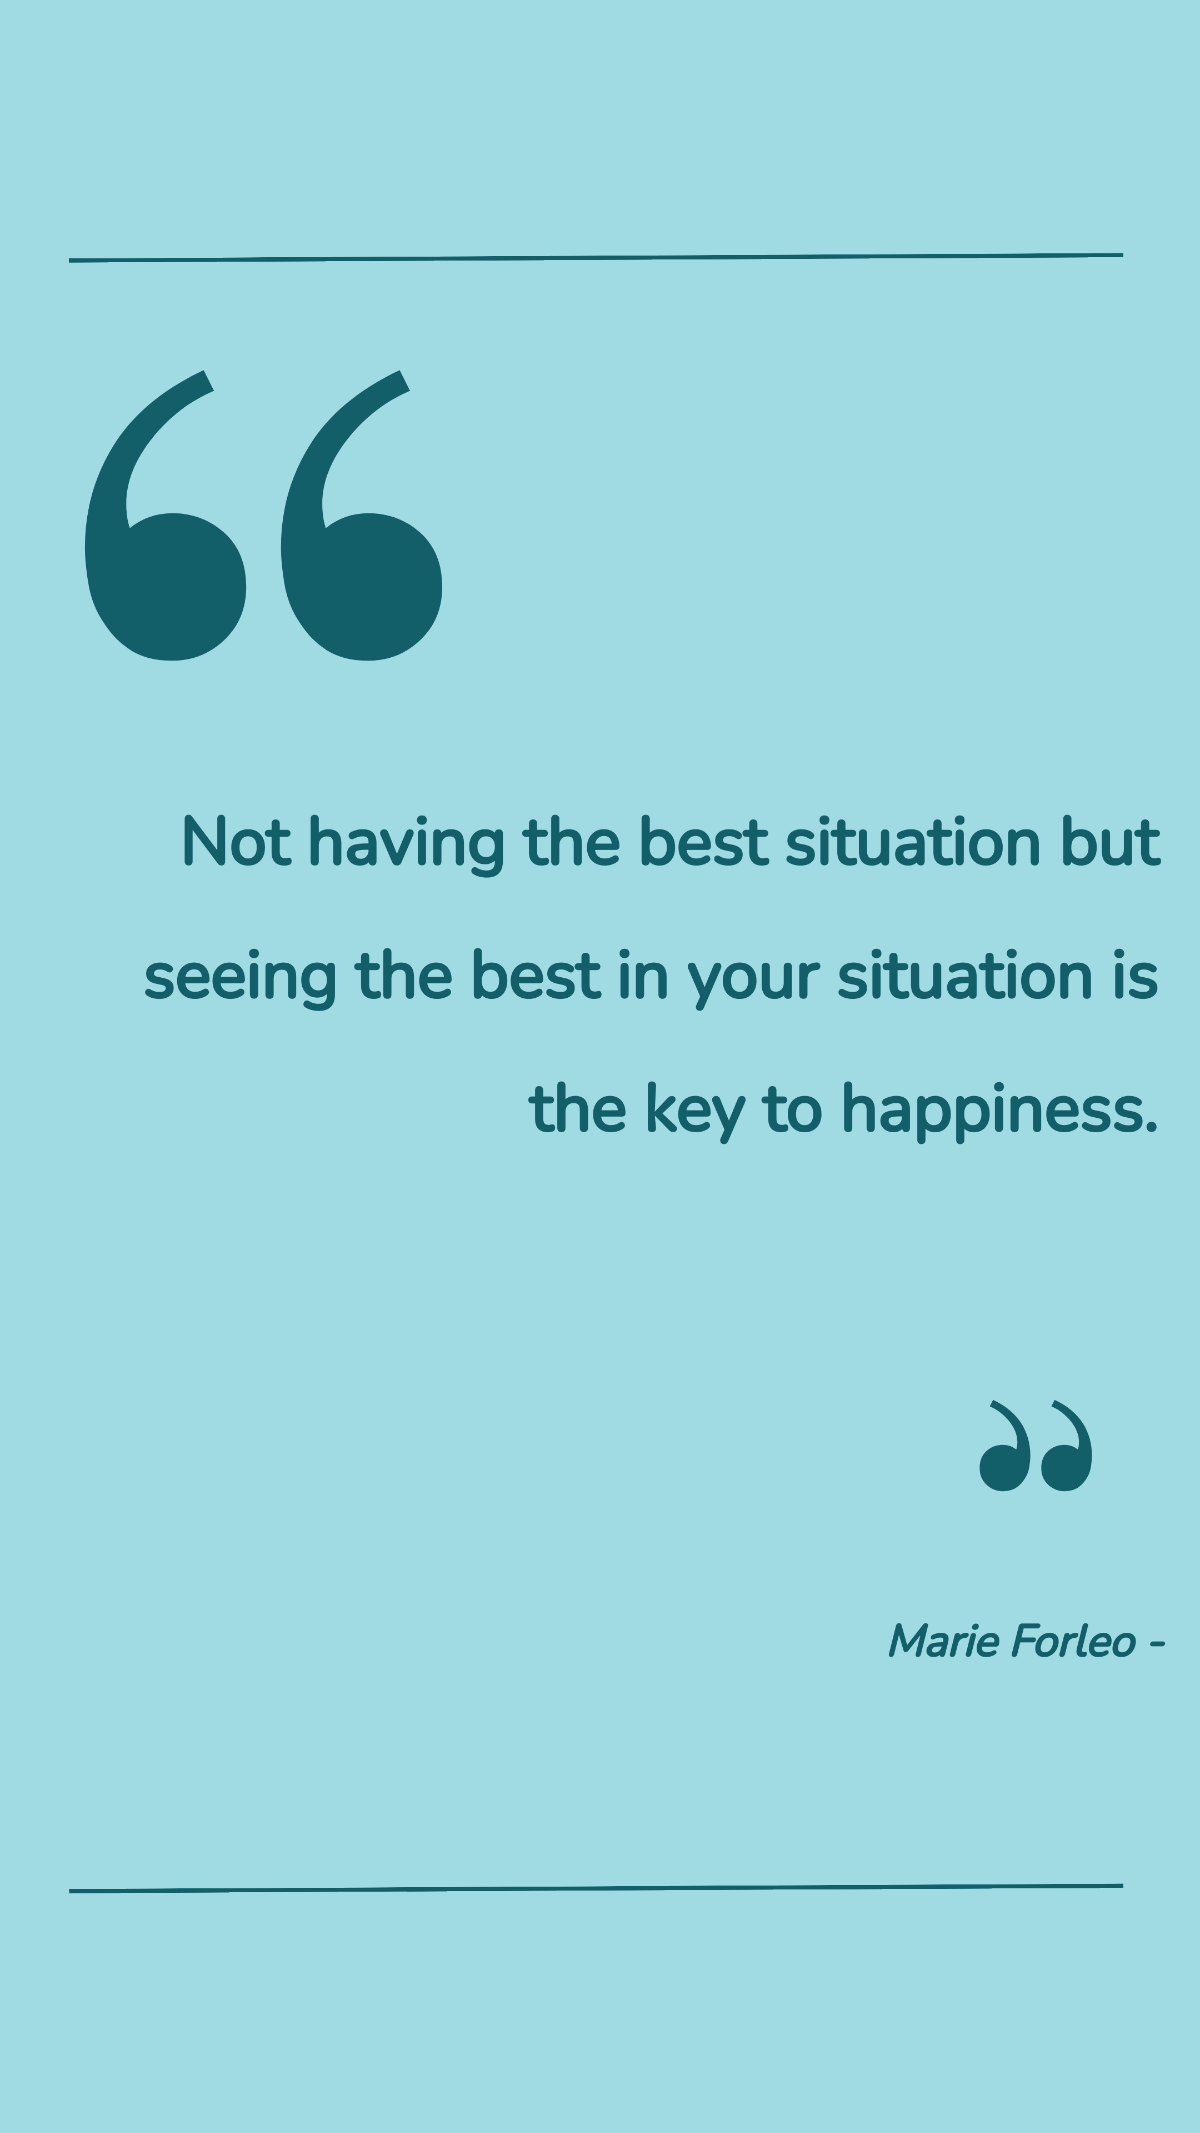 Marie Forleo - Not having the best situation but seeing the best in your situation is the key to happiness.